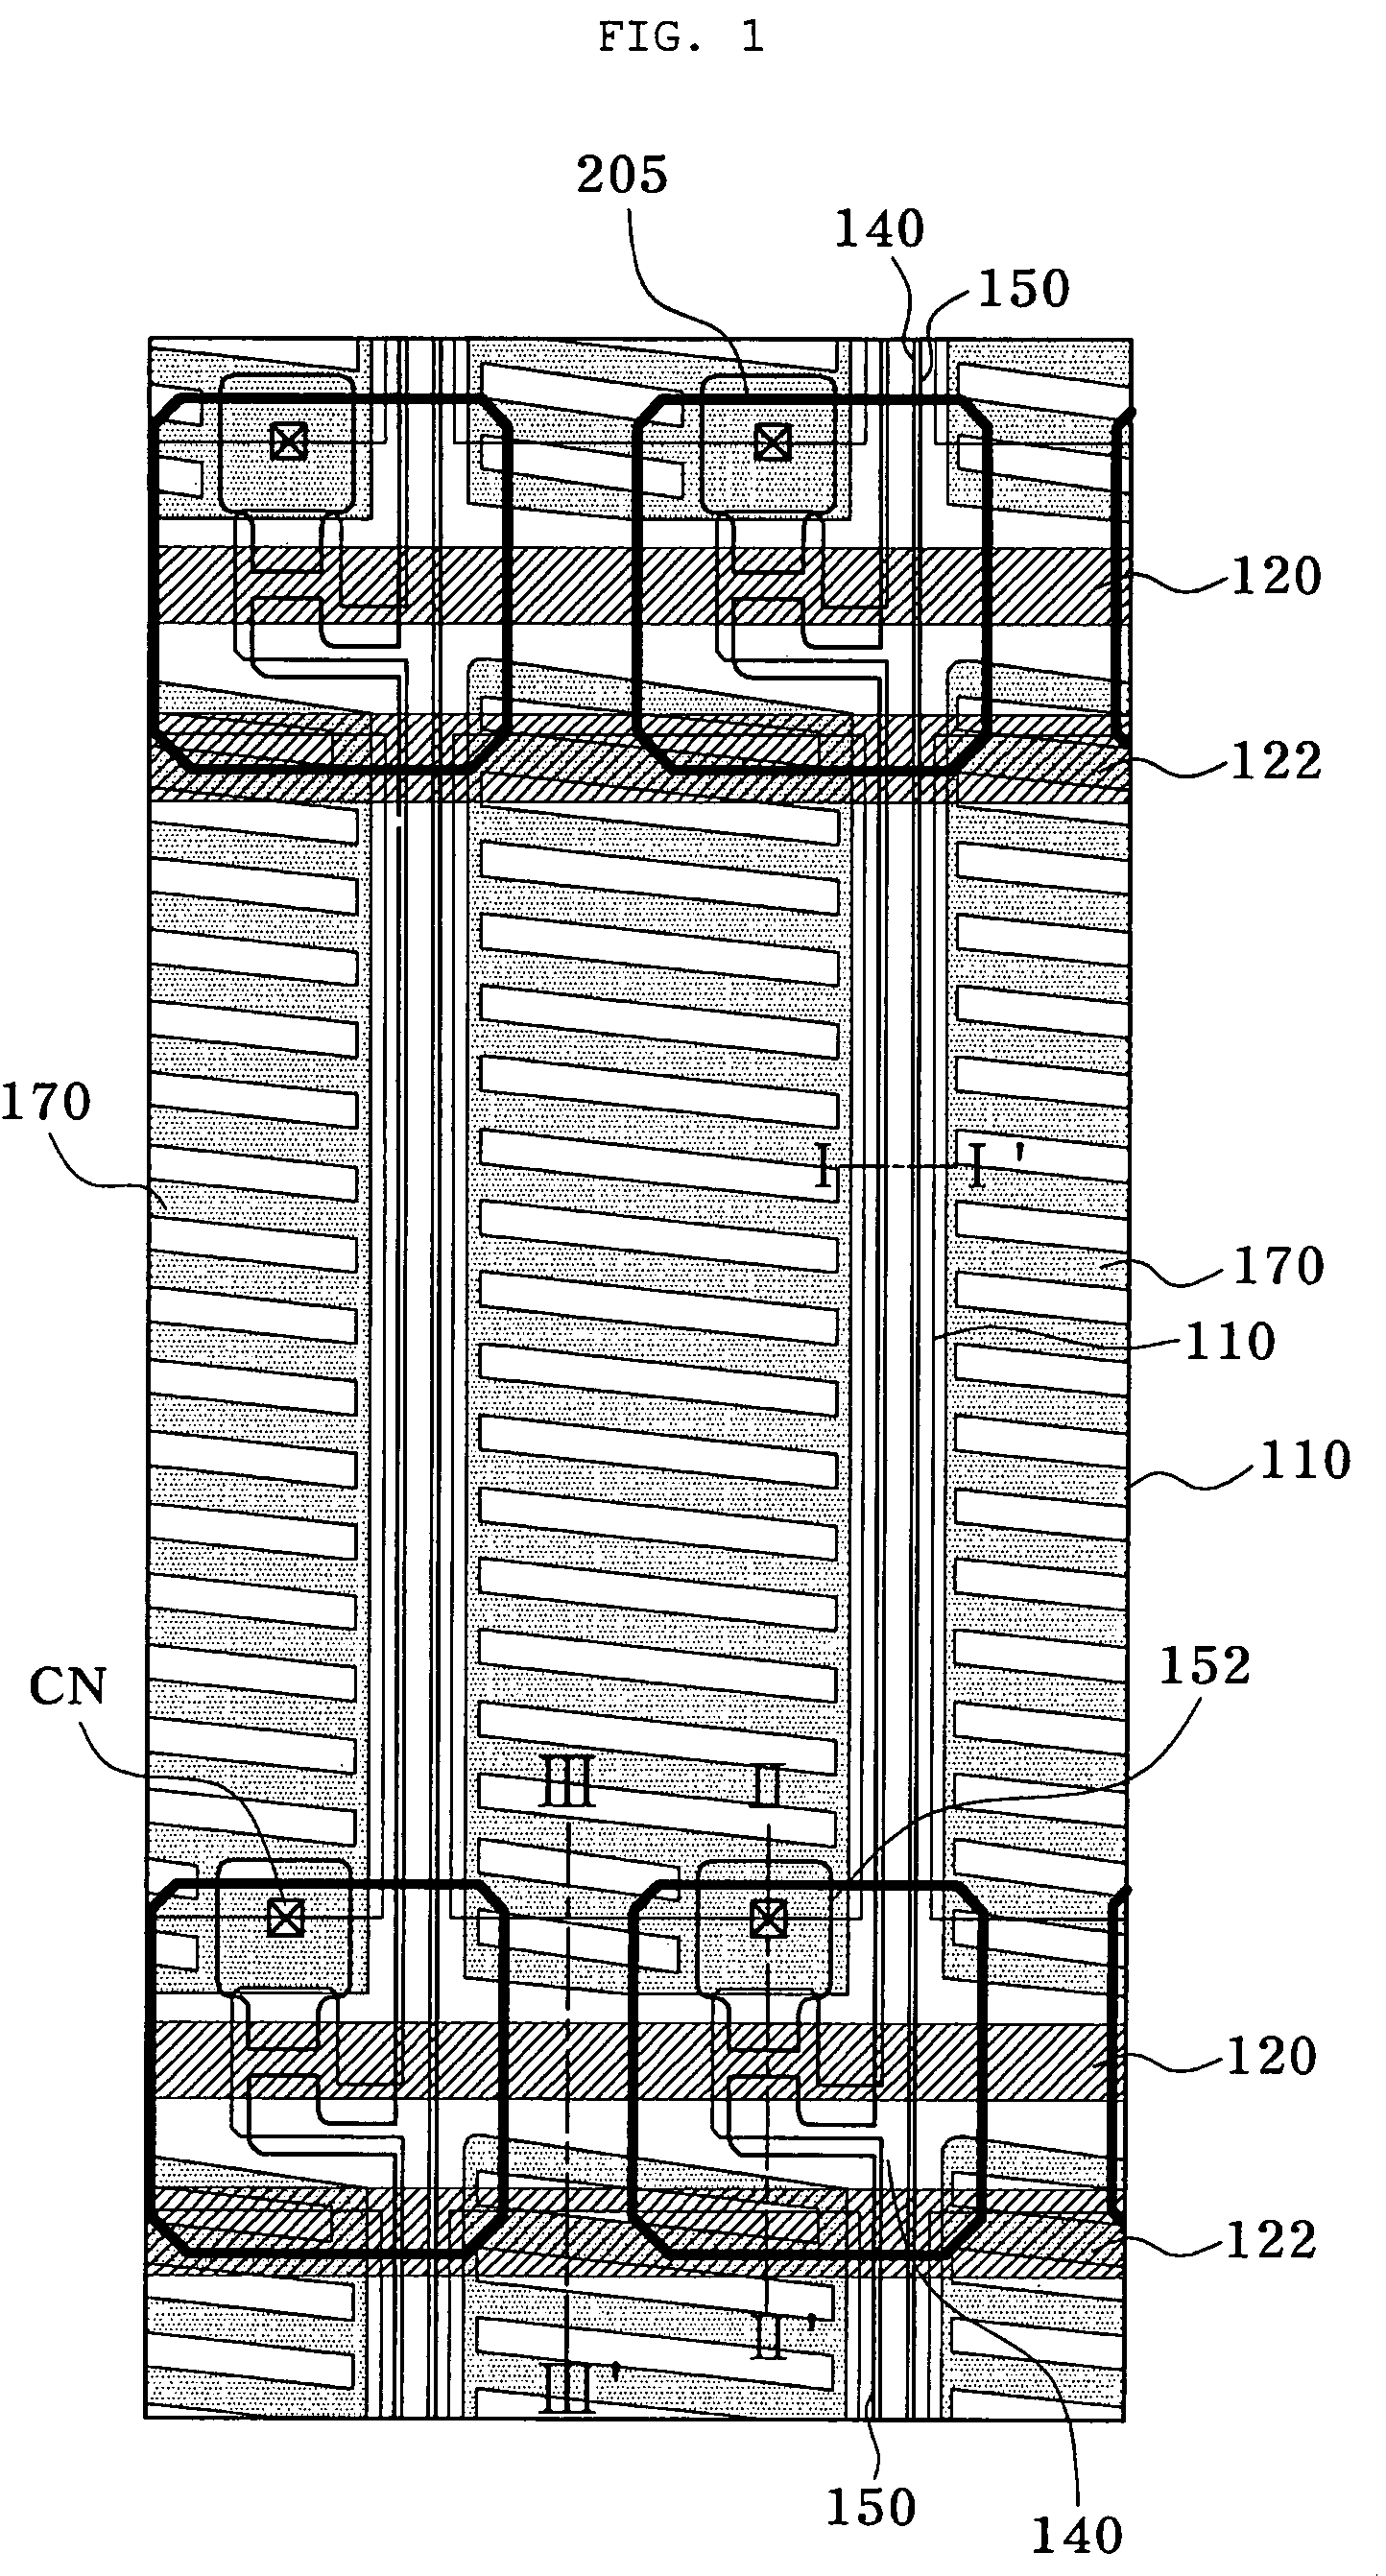 Fringe field switching mode liquid crystal display and manufacturing method thereof